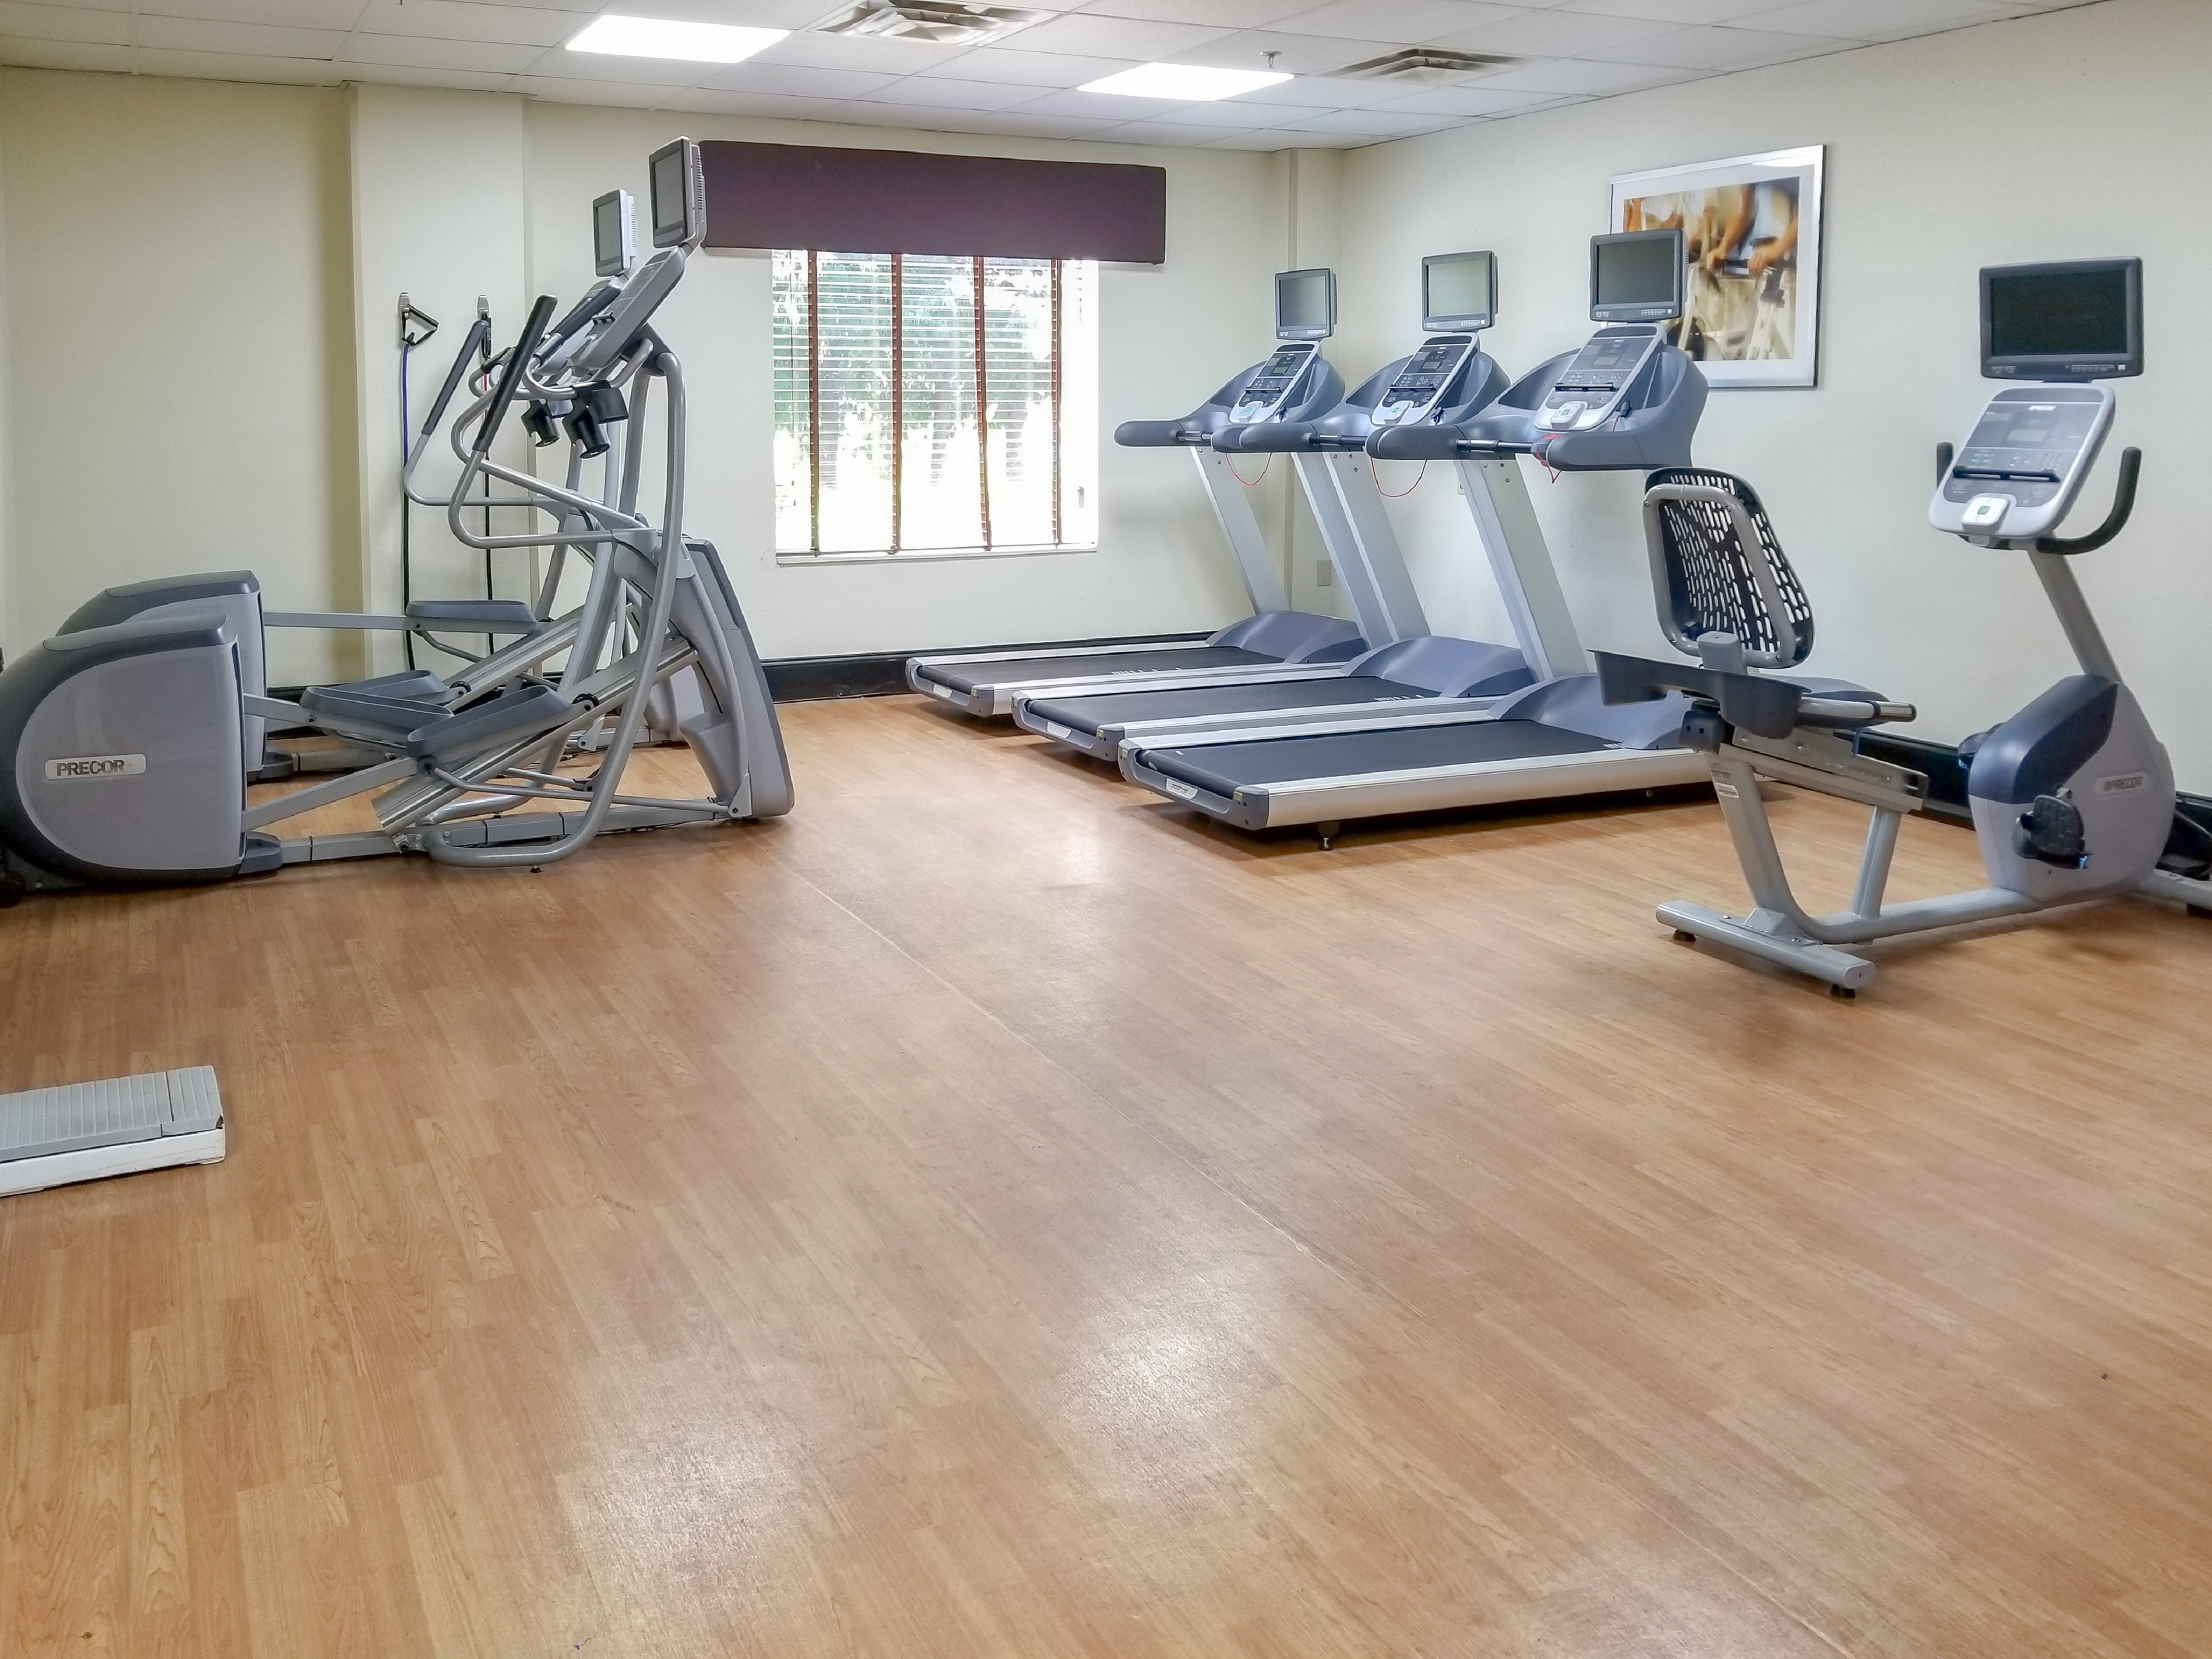 24 hr fitness center with six PreCor machines + free weights